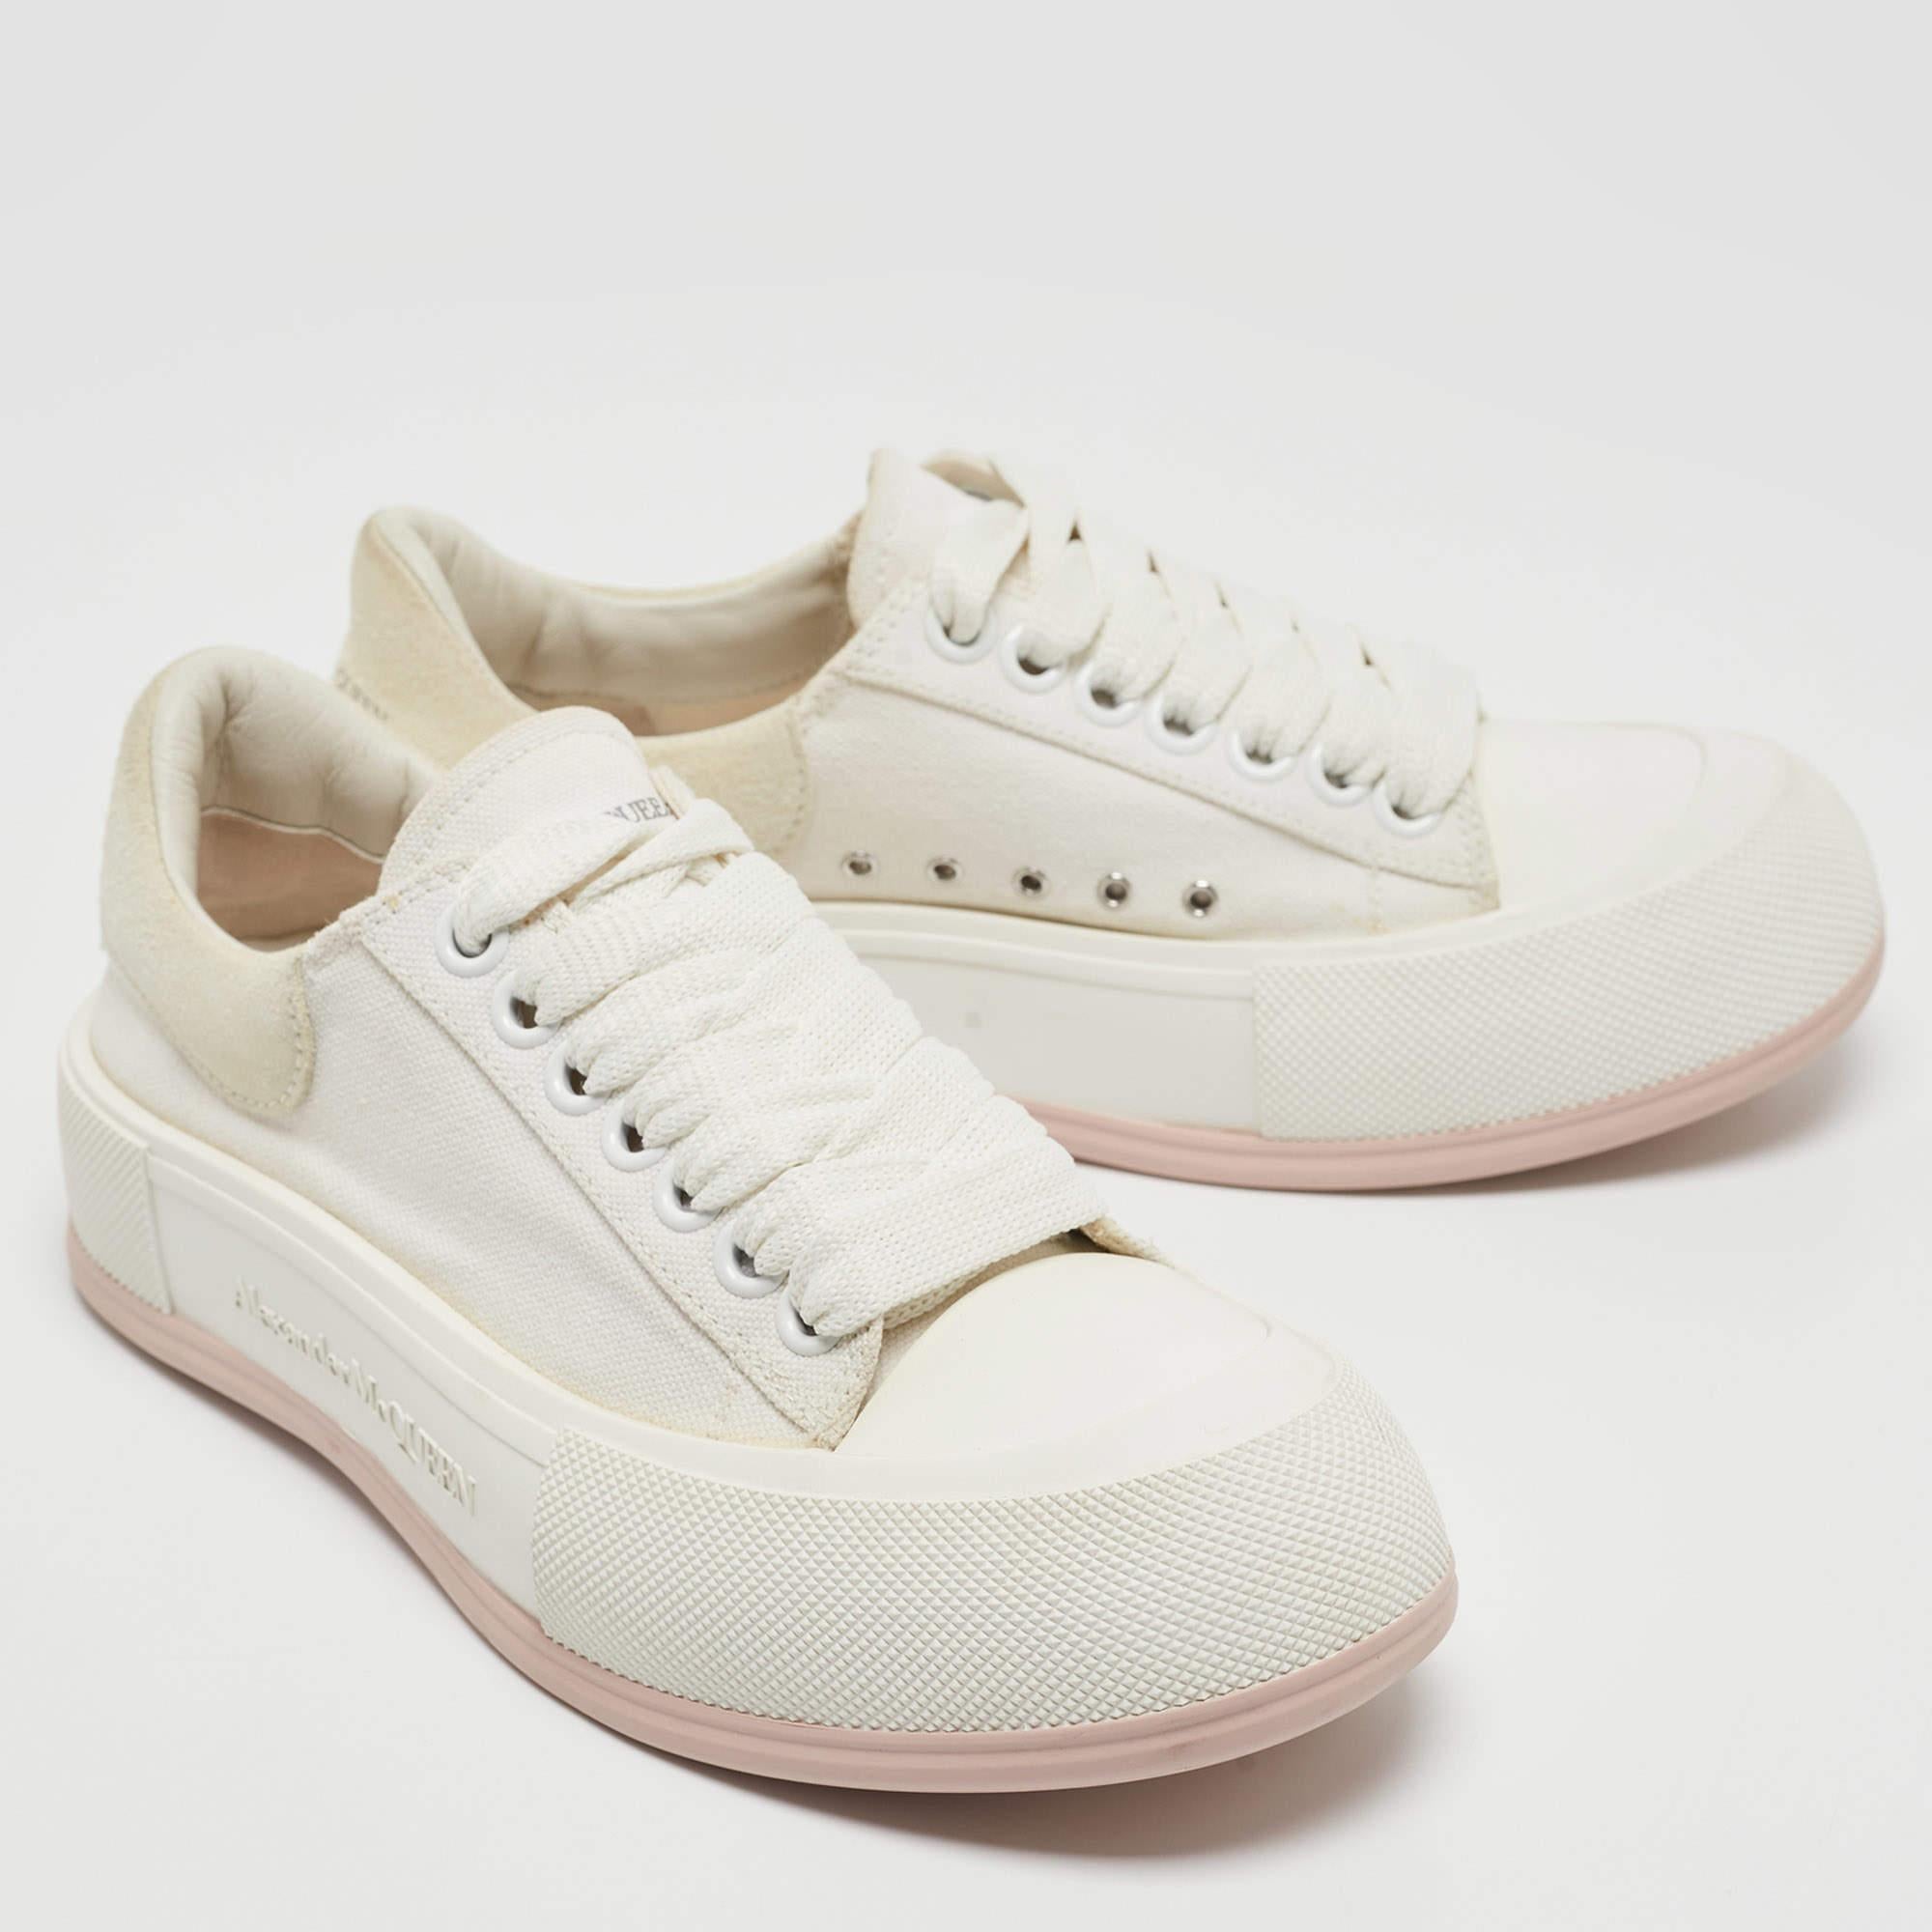 Alexander McQueen White/Grey Suede and Canvas Low Top Sneakers Size 37 In Good Condition For Sale In Dubai, Al Qouz 2